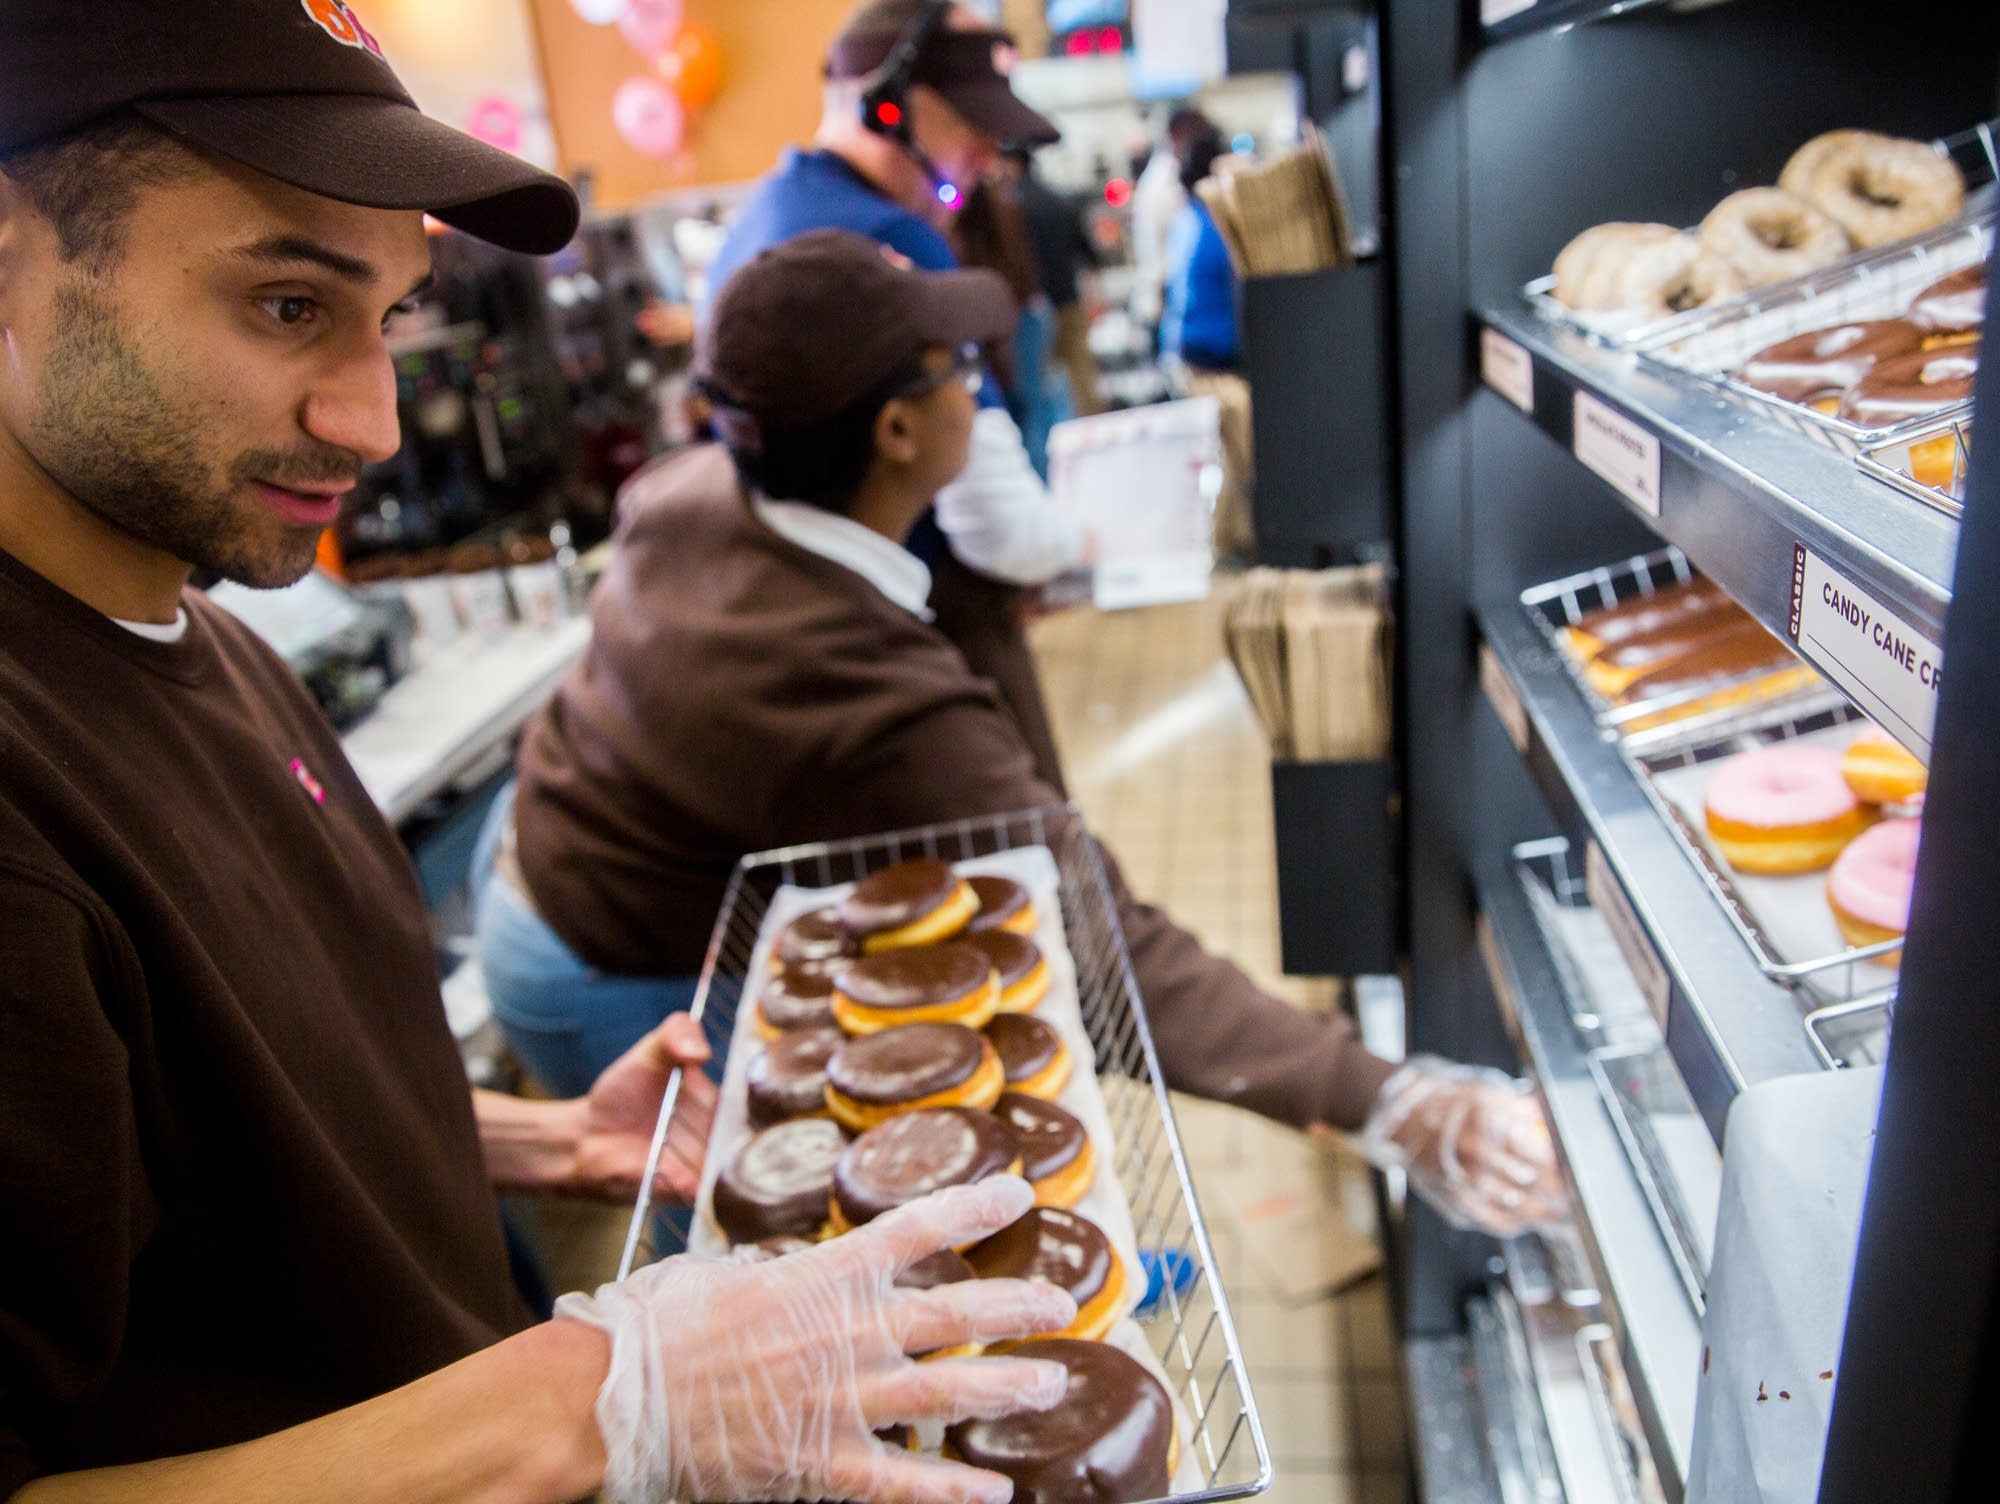 How Much Does Dunkin Donuts Pay? (Dunkin' Donuts Salaries)